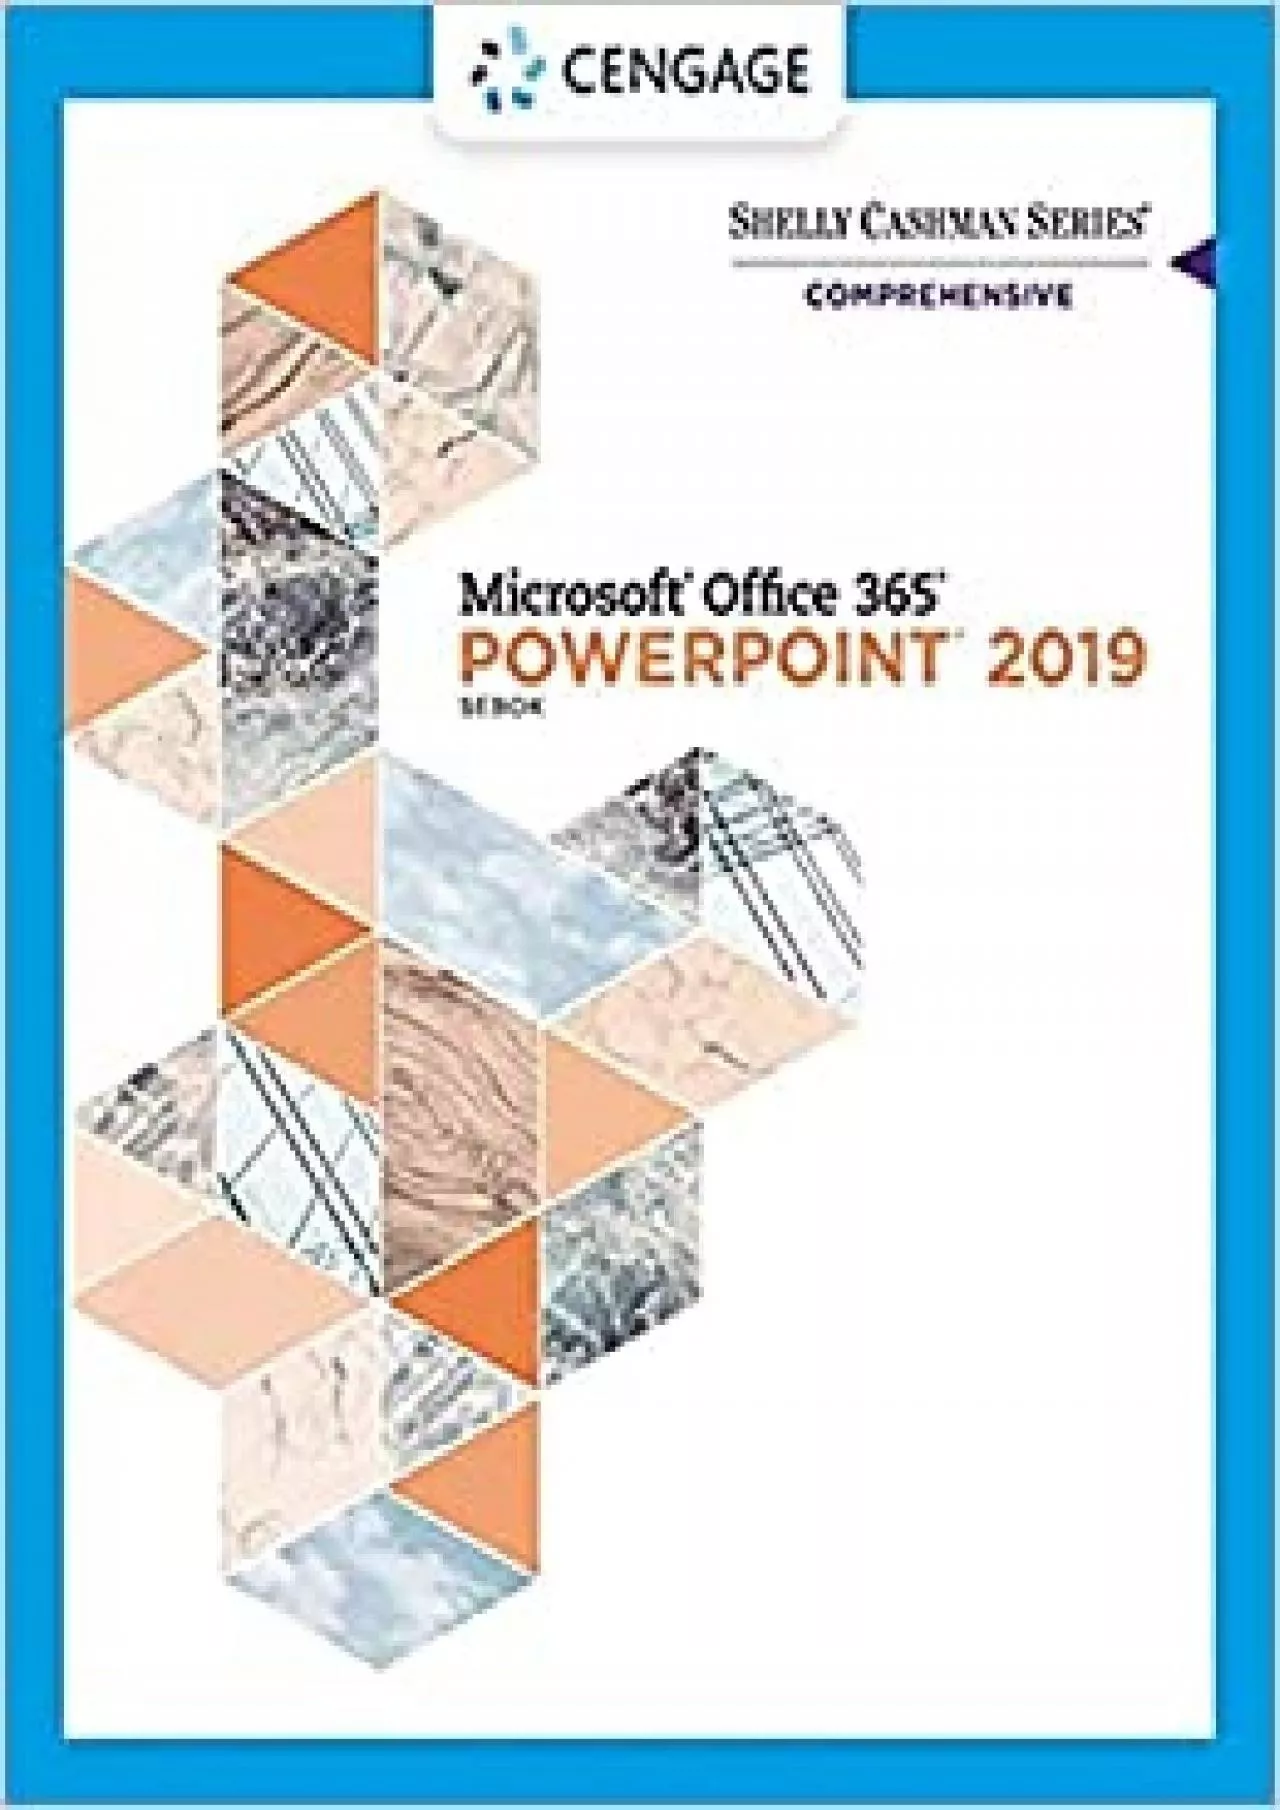 Shelly Cashman Series Microsoft Office 365 & PowerPoint 2019 Comprehensive (MindTap Course